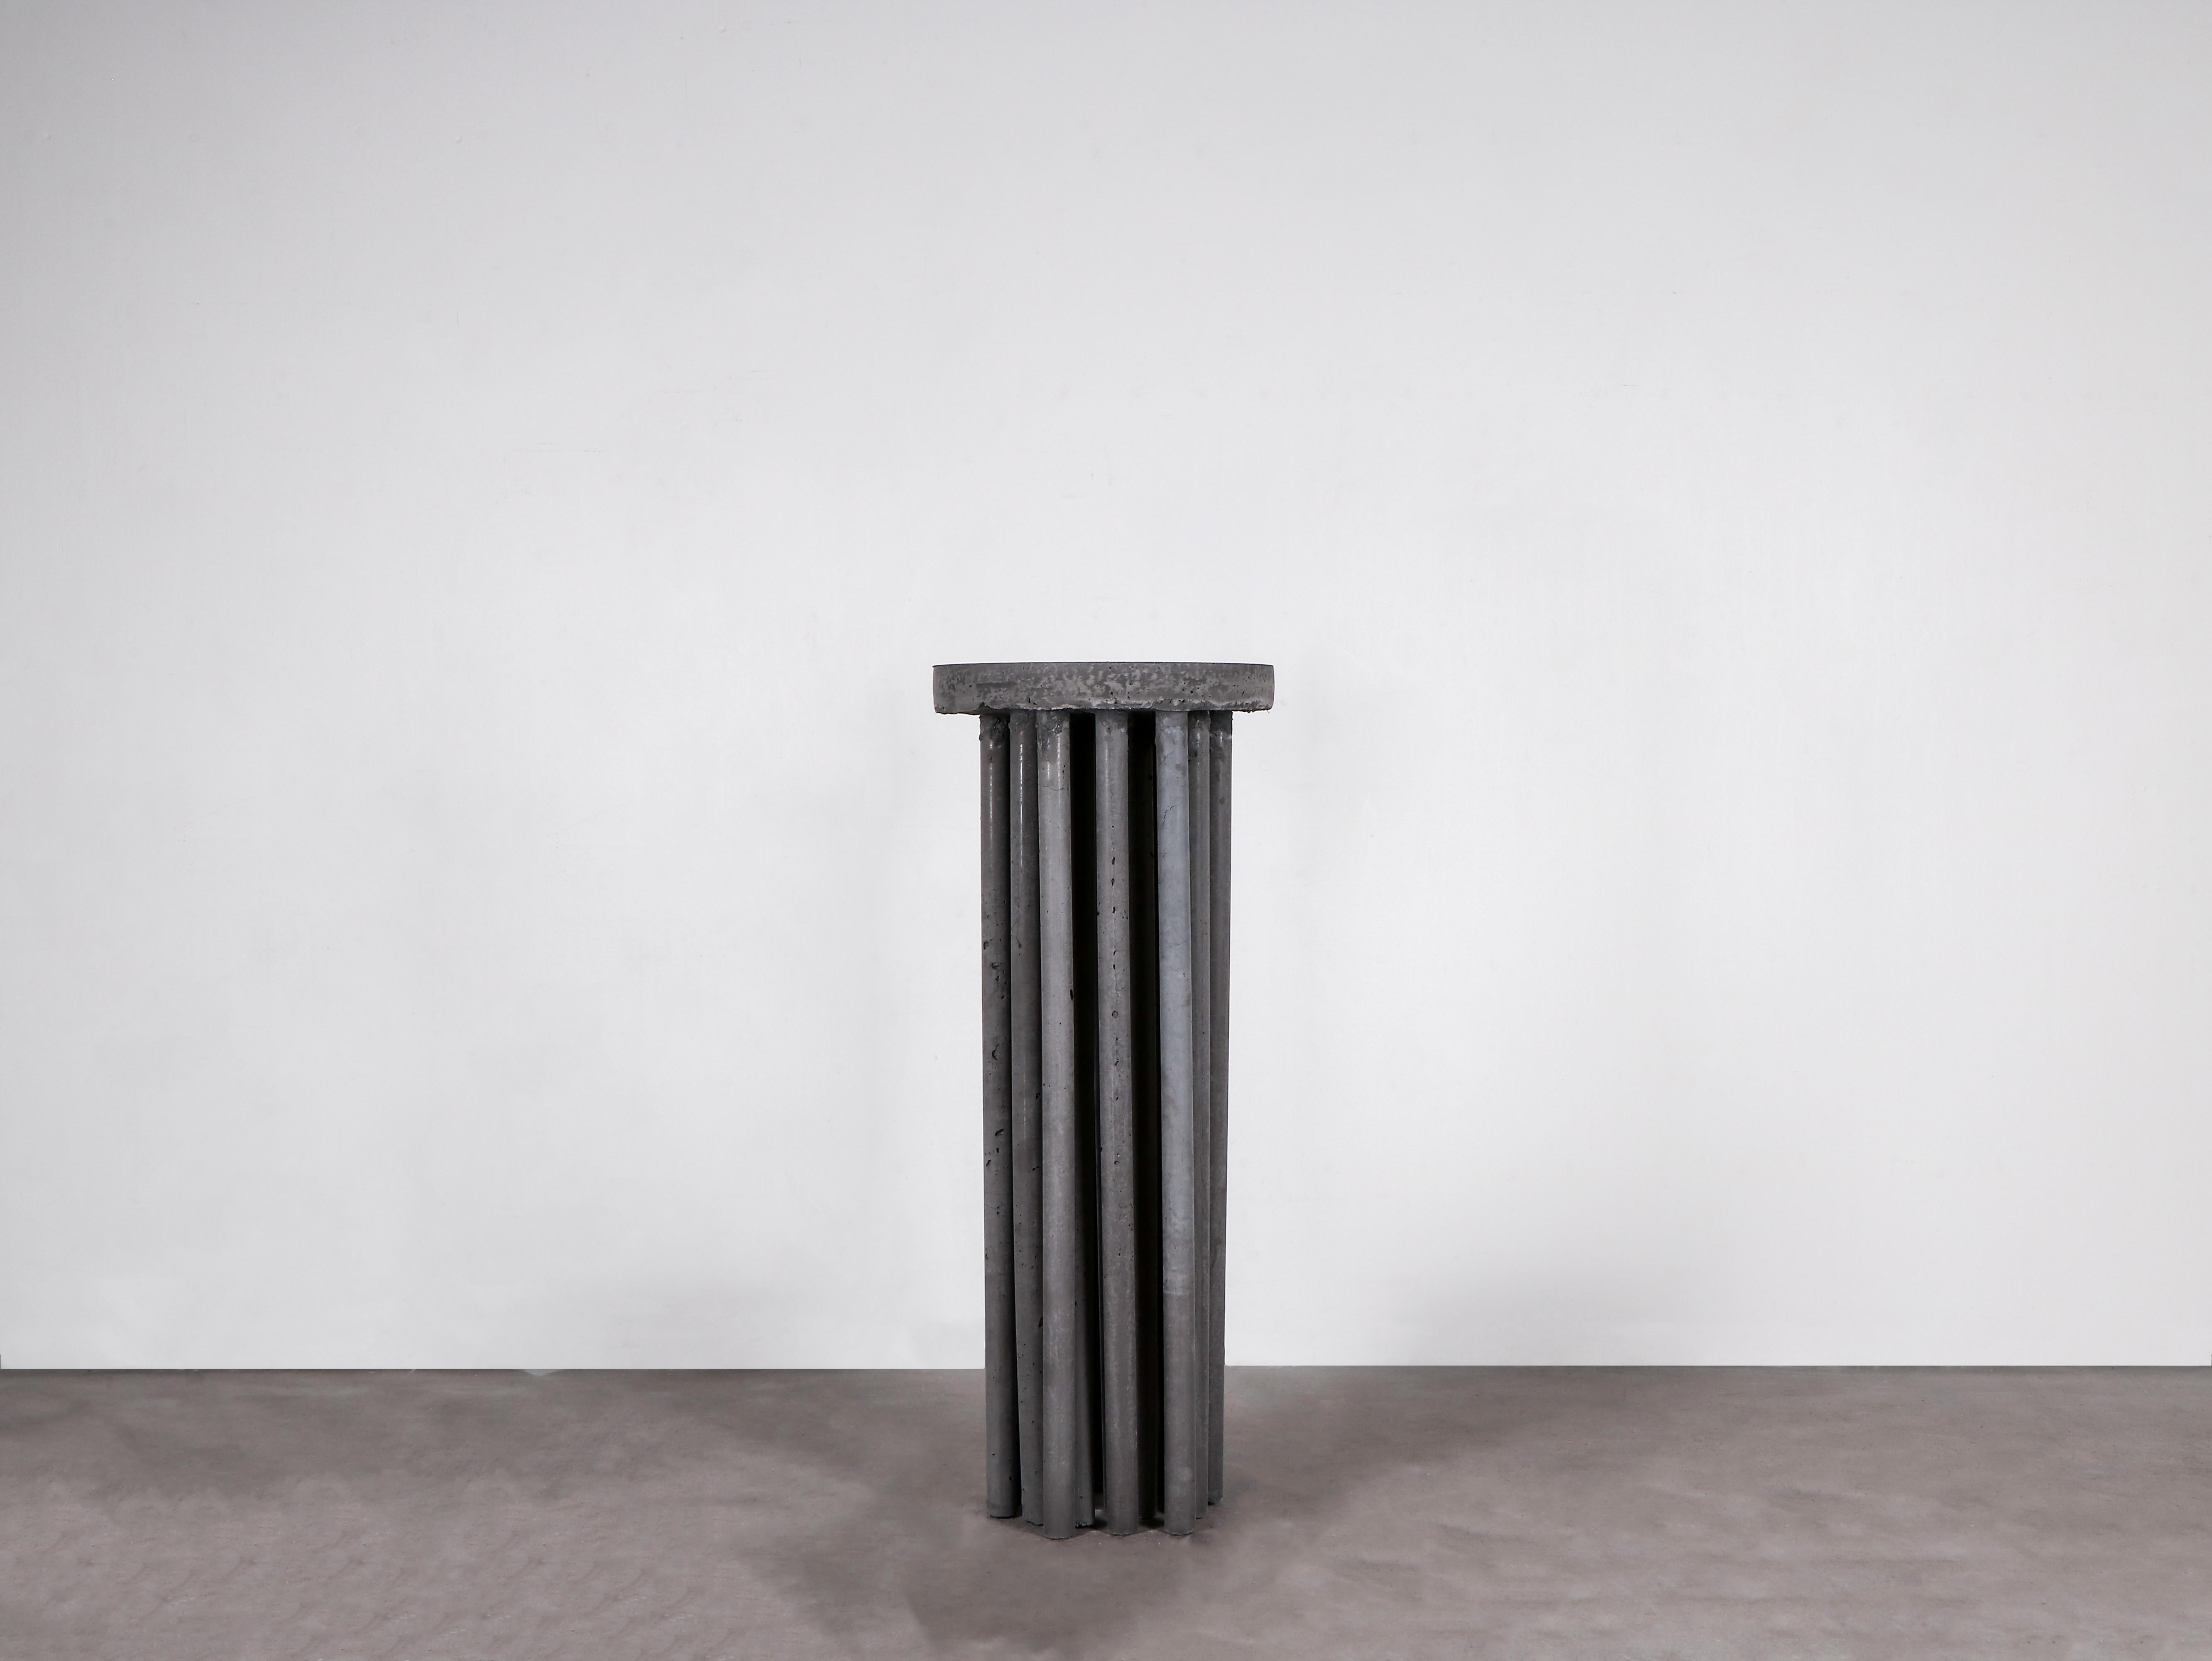 Contemporary dark grey pedestal in Concrete - Dop Plinth by Lucas Morten

2022
Limited edition of 6 + 1 AP
Dimensions (cm): Diameter 30 height 100
Material: sculpted in colored concrete

With elements fetched by the architectural era